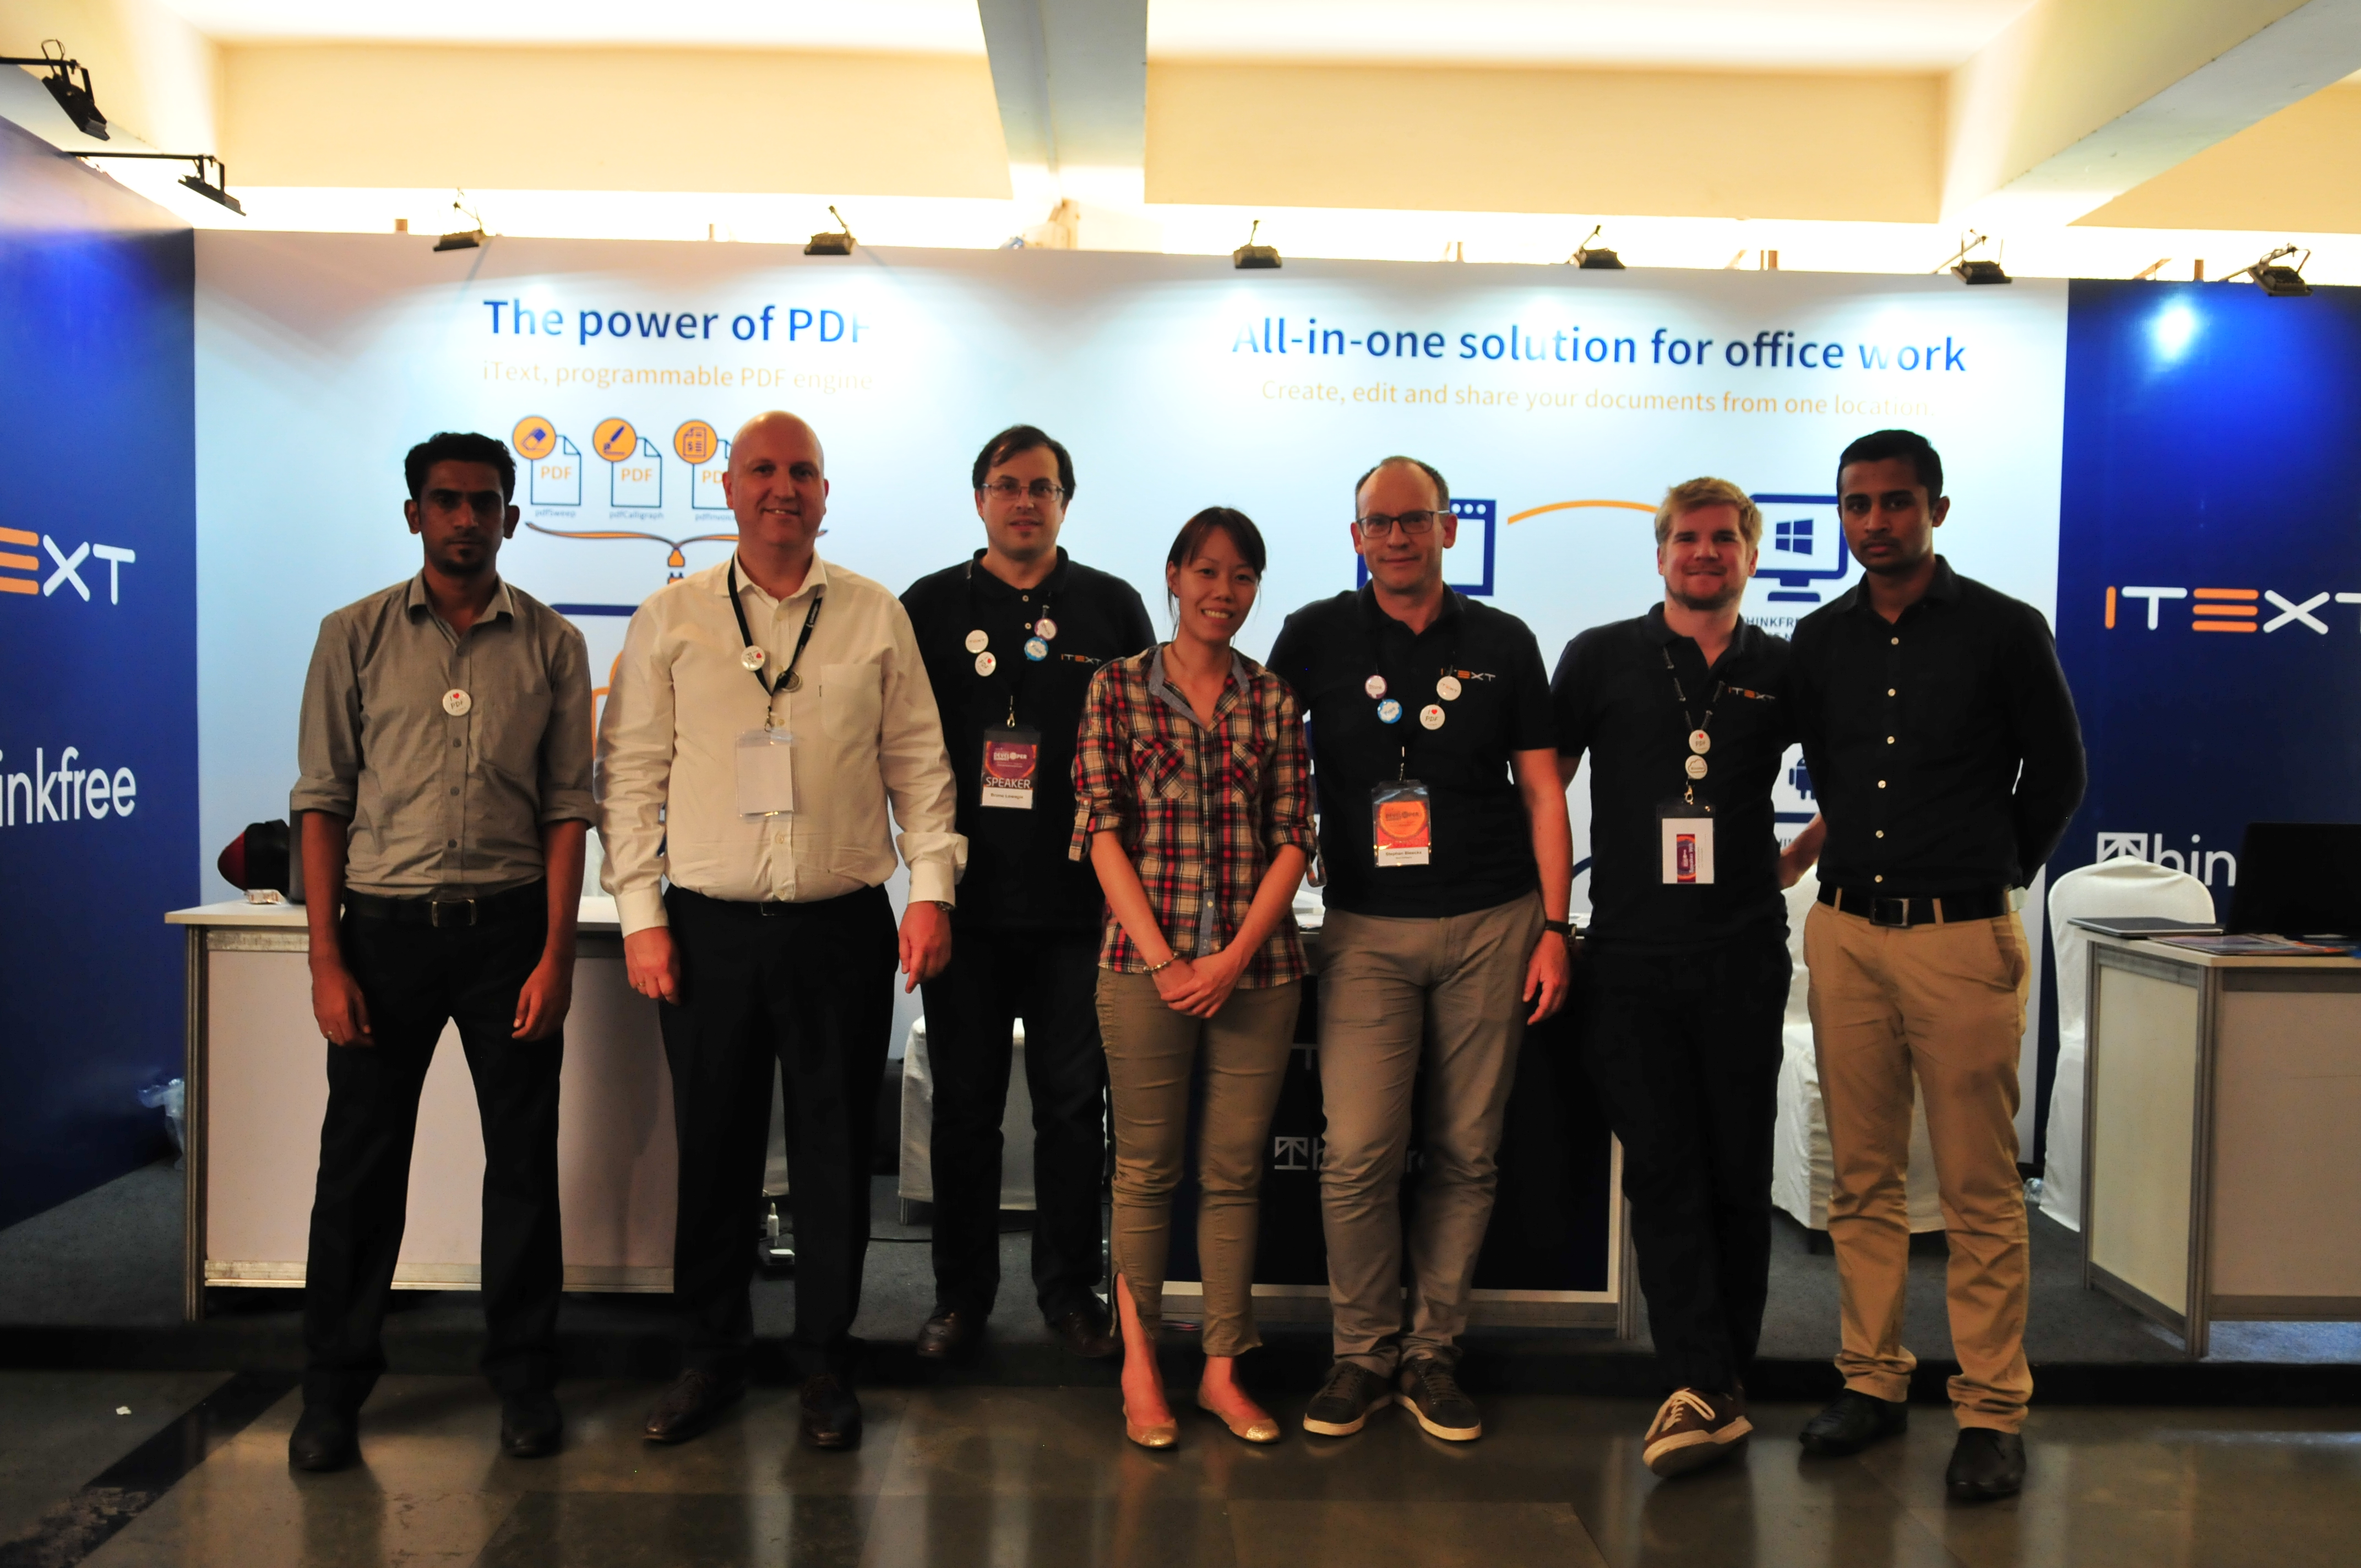 The iText crew at the Great Indian Developer Summit